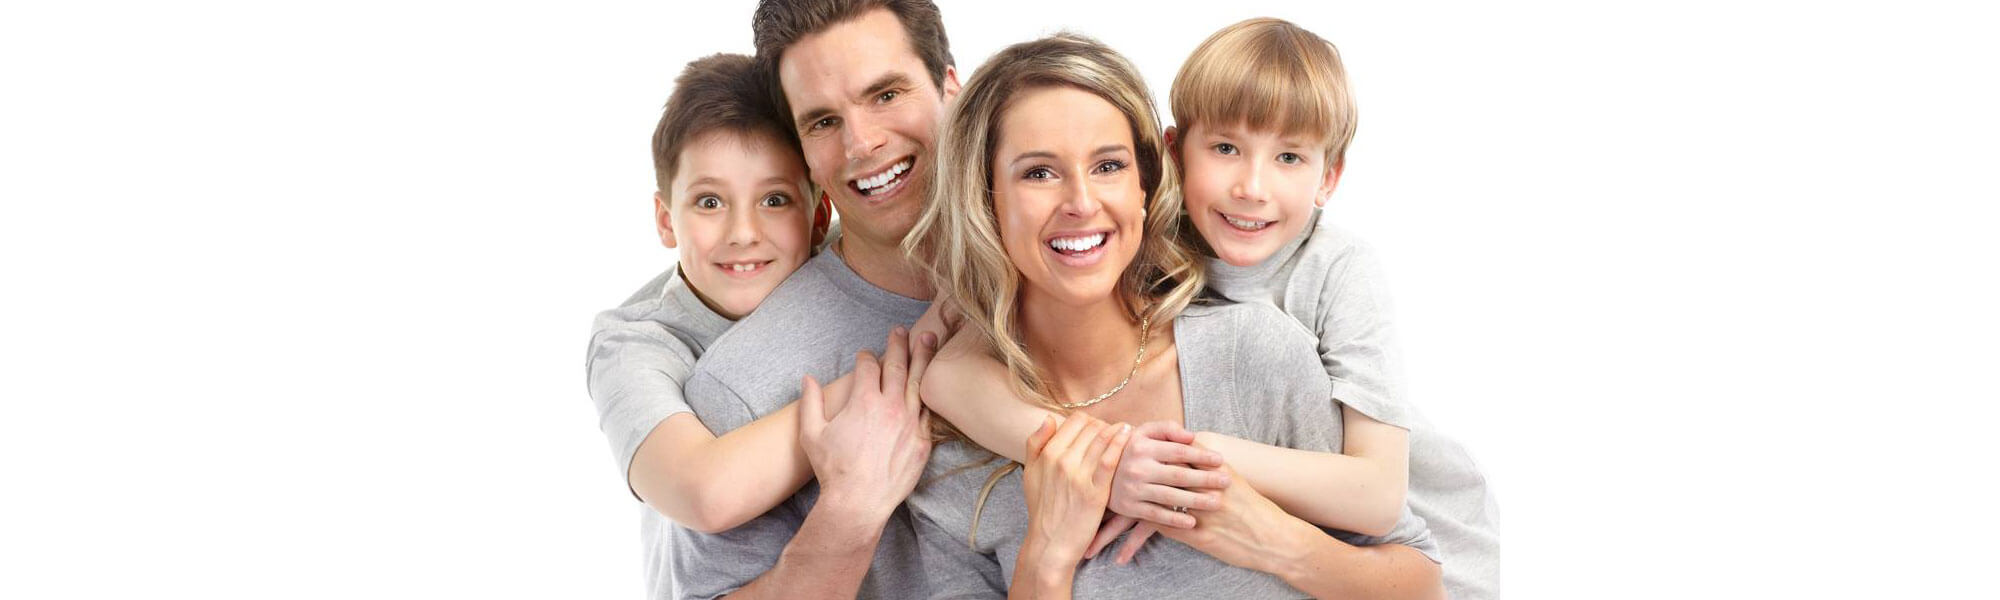 Family on a white background